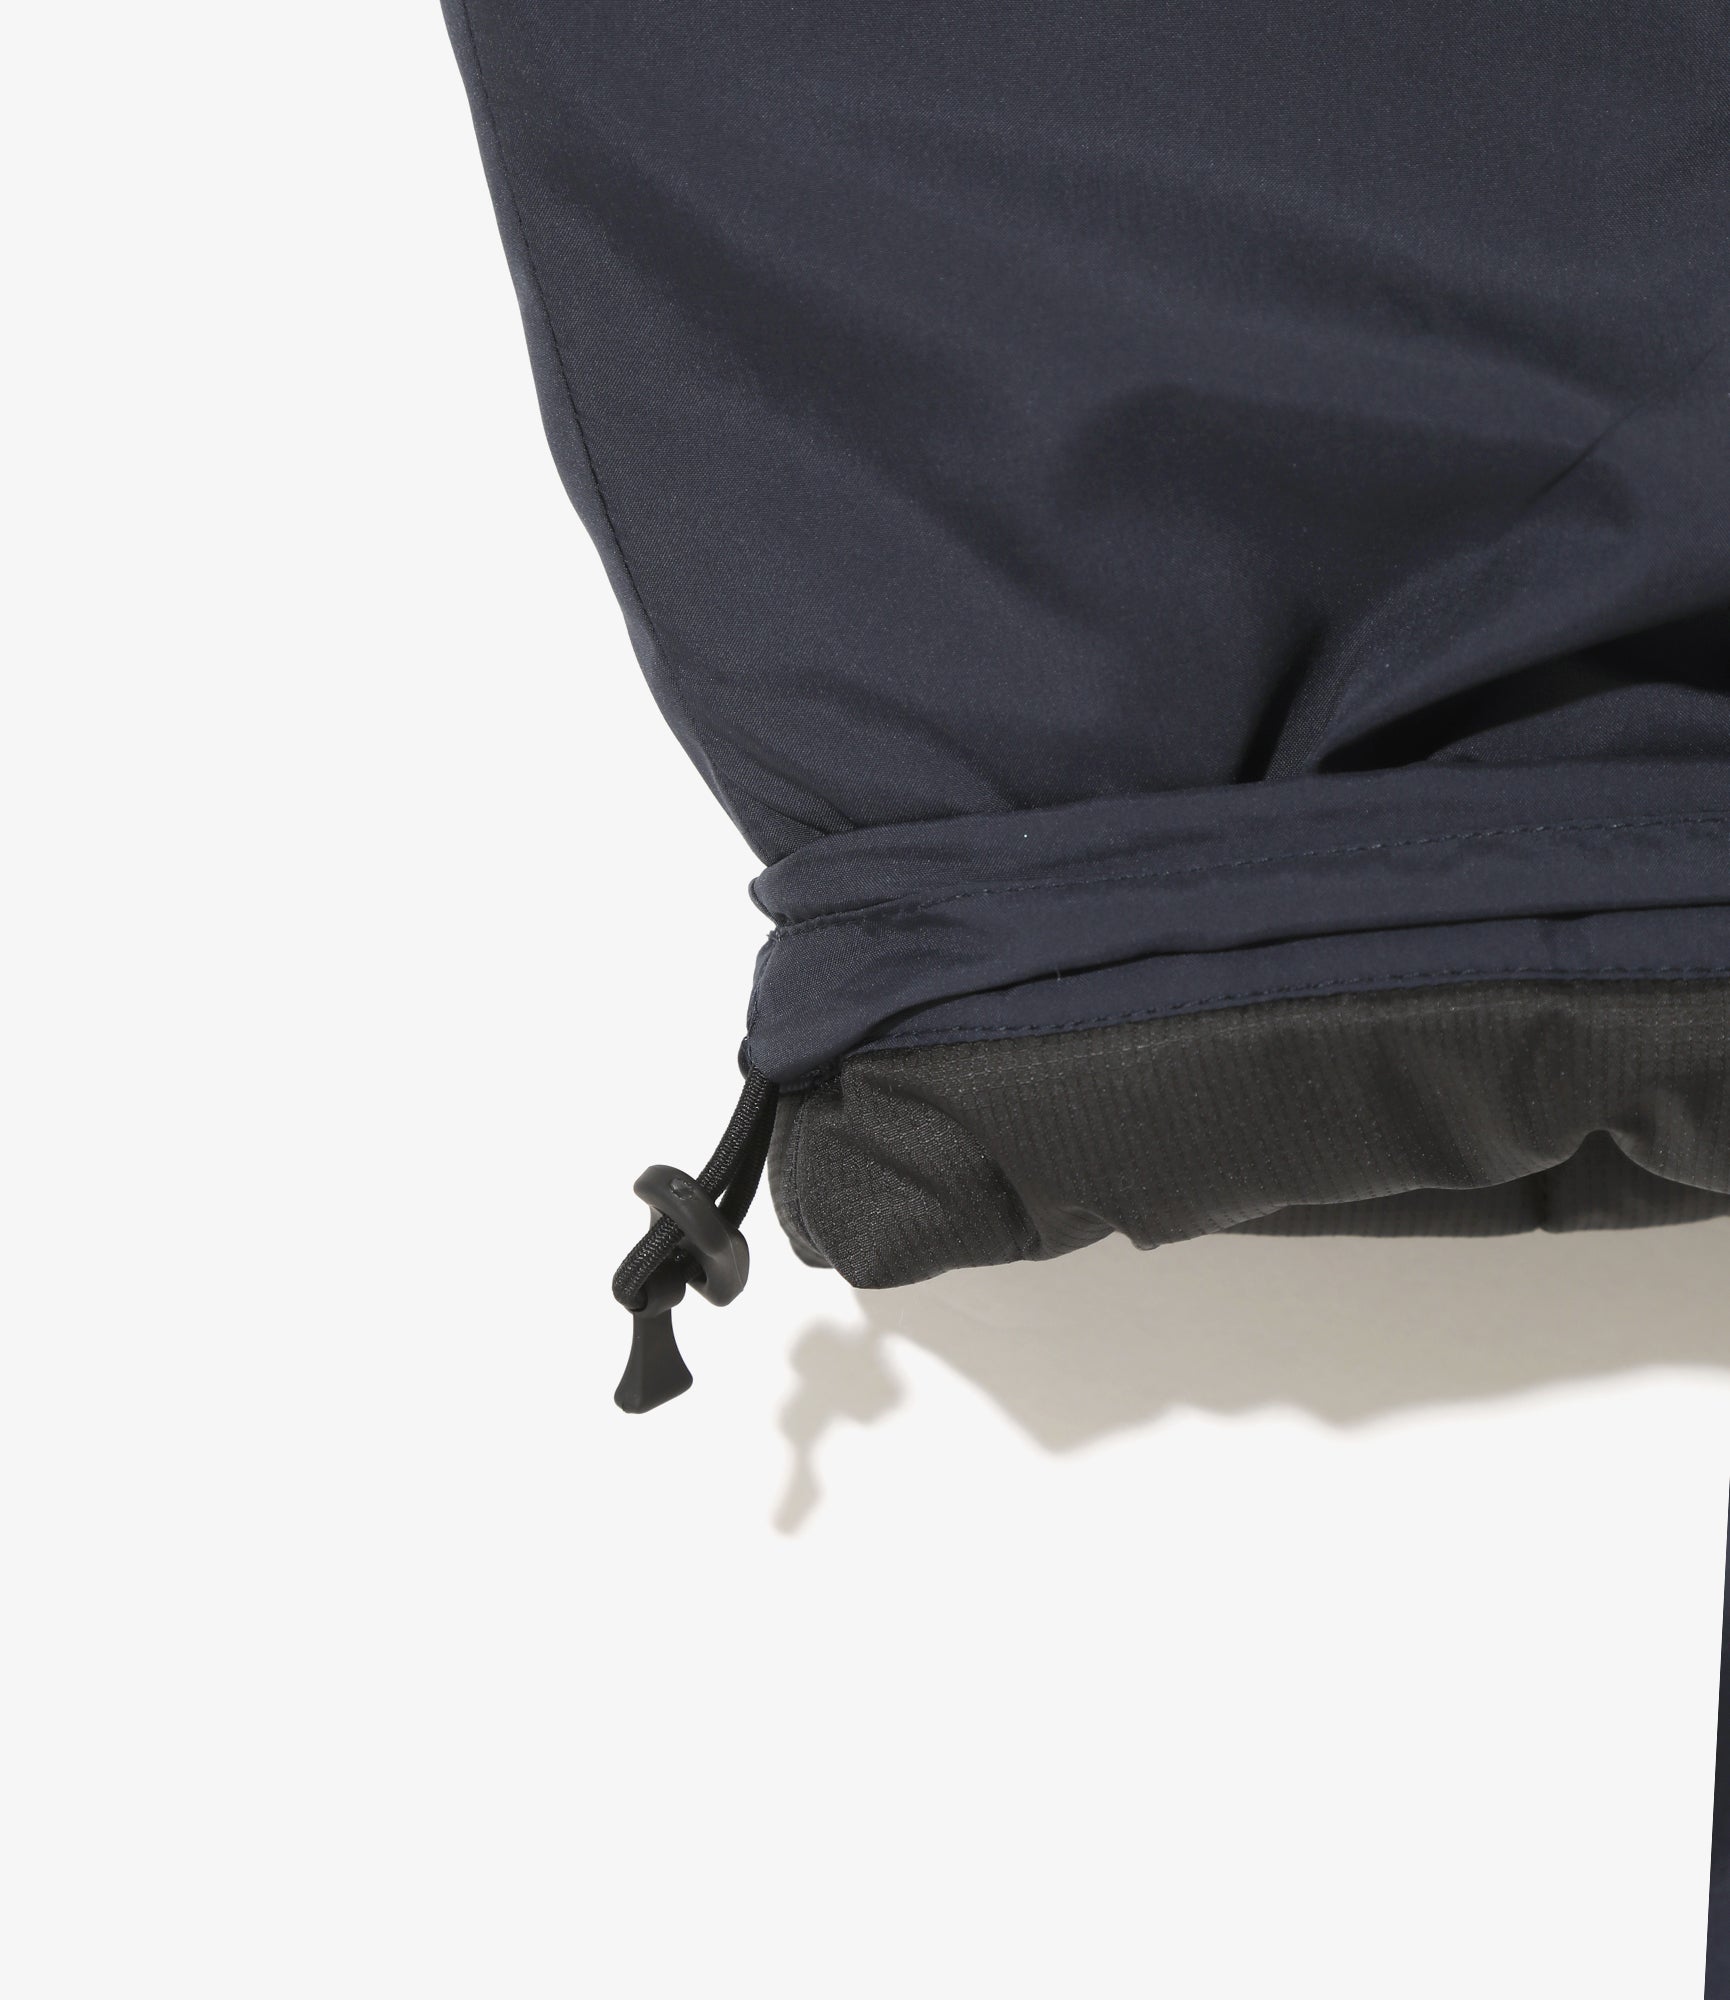 Insulator Belted Pant - Navy - Poly Peach Skin